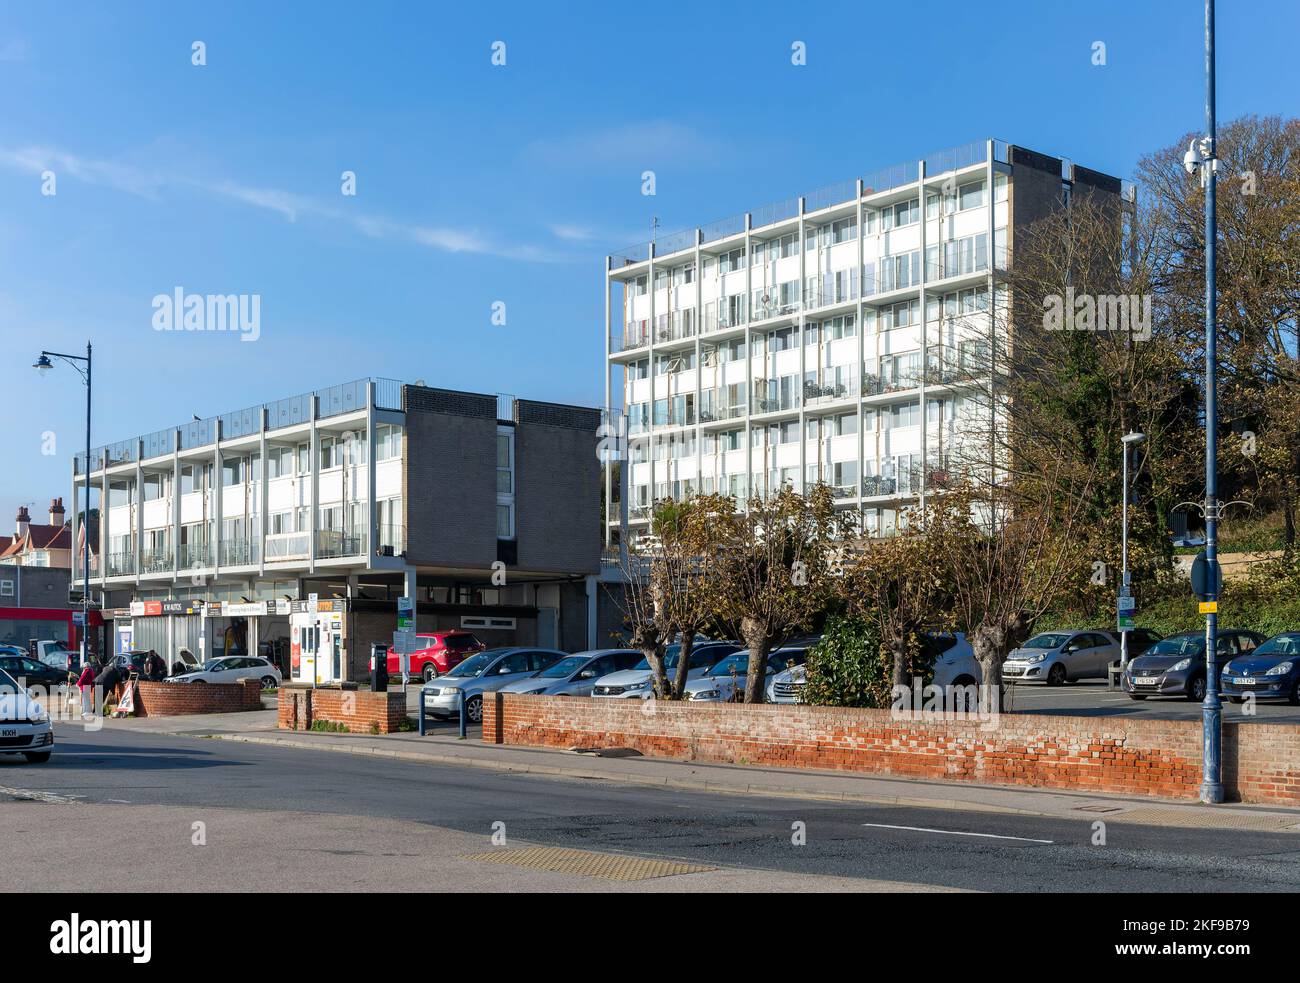 1960s style block of flats on the seafront at Felixstowe, Suffolk, England Stock Photo